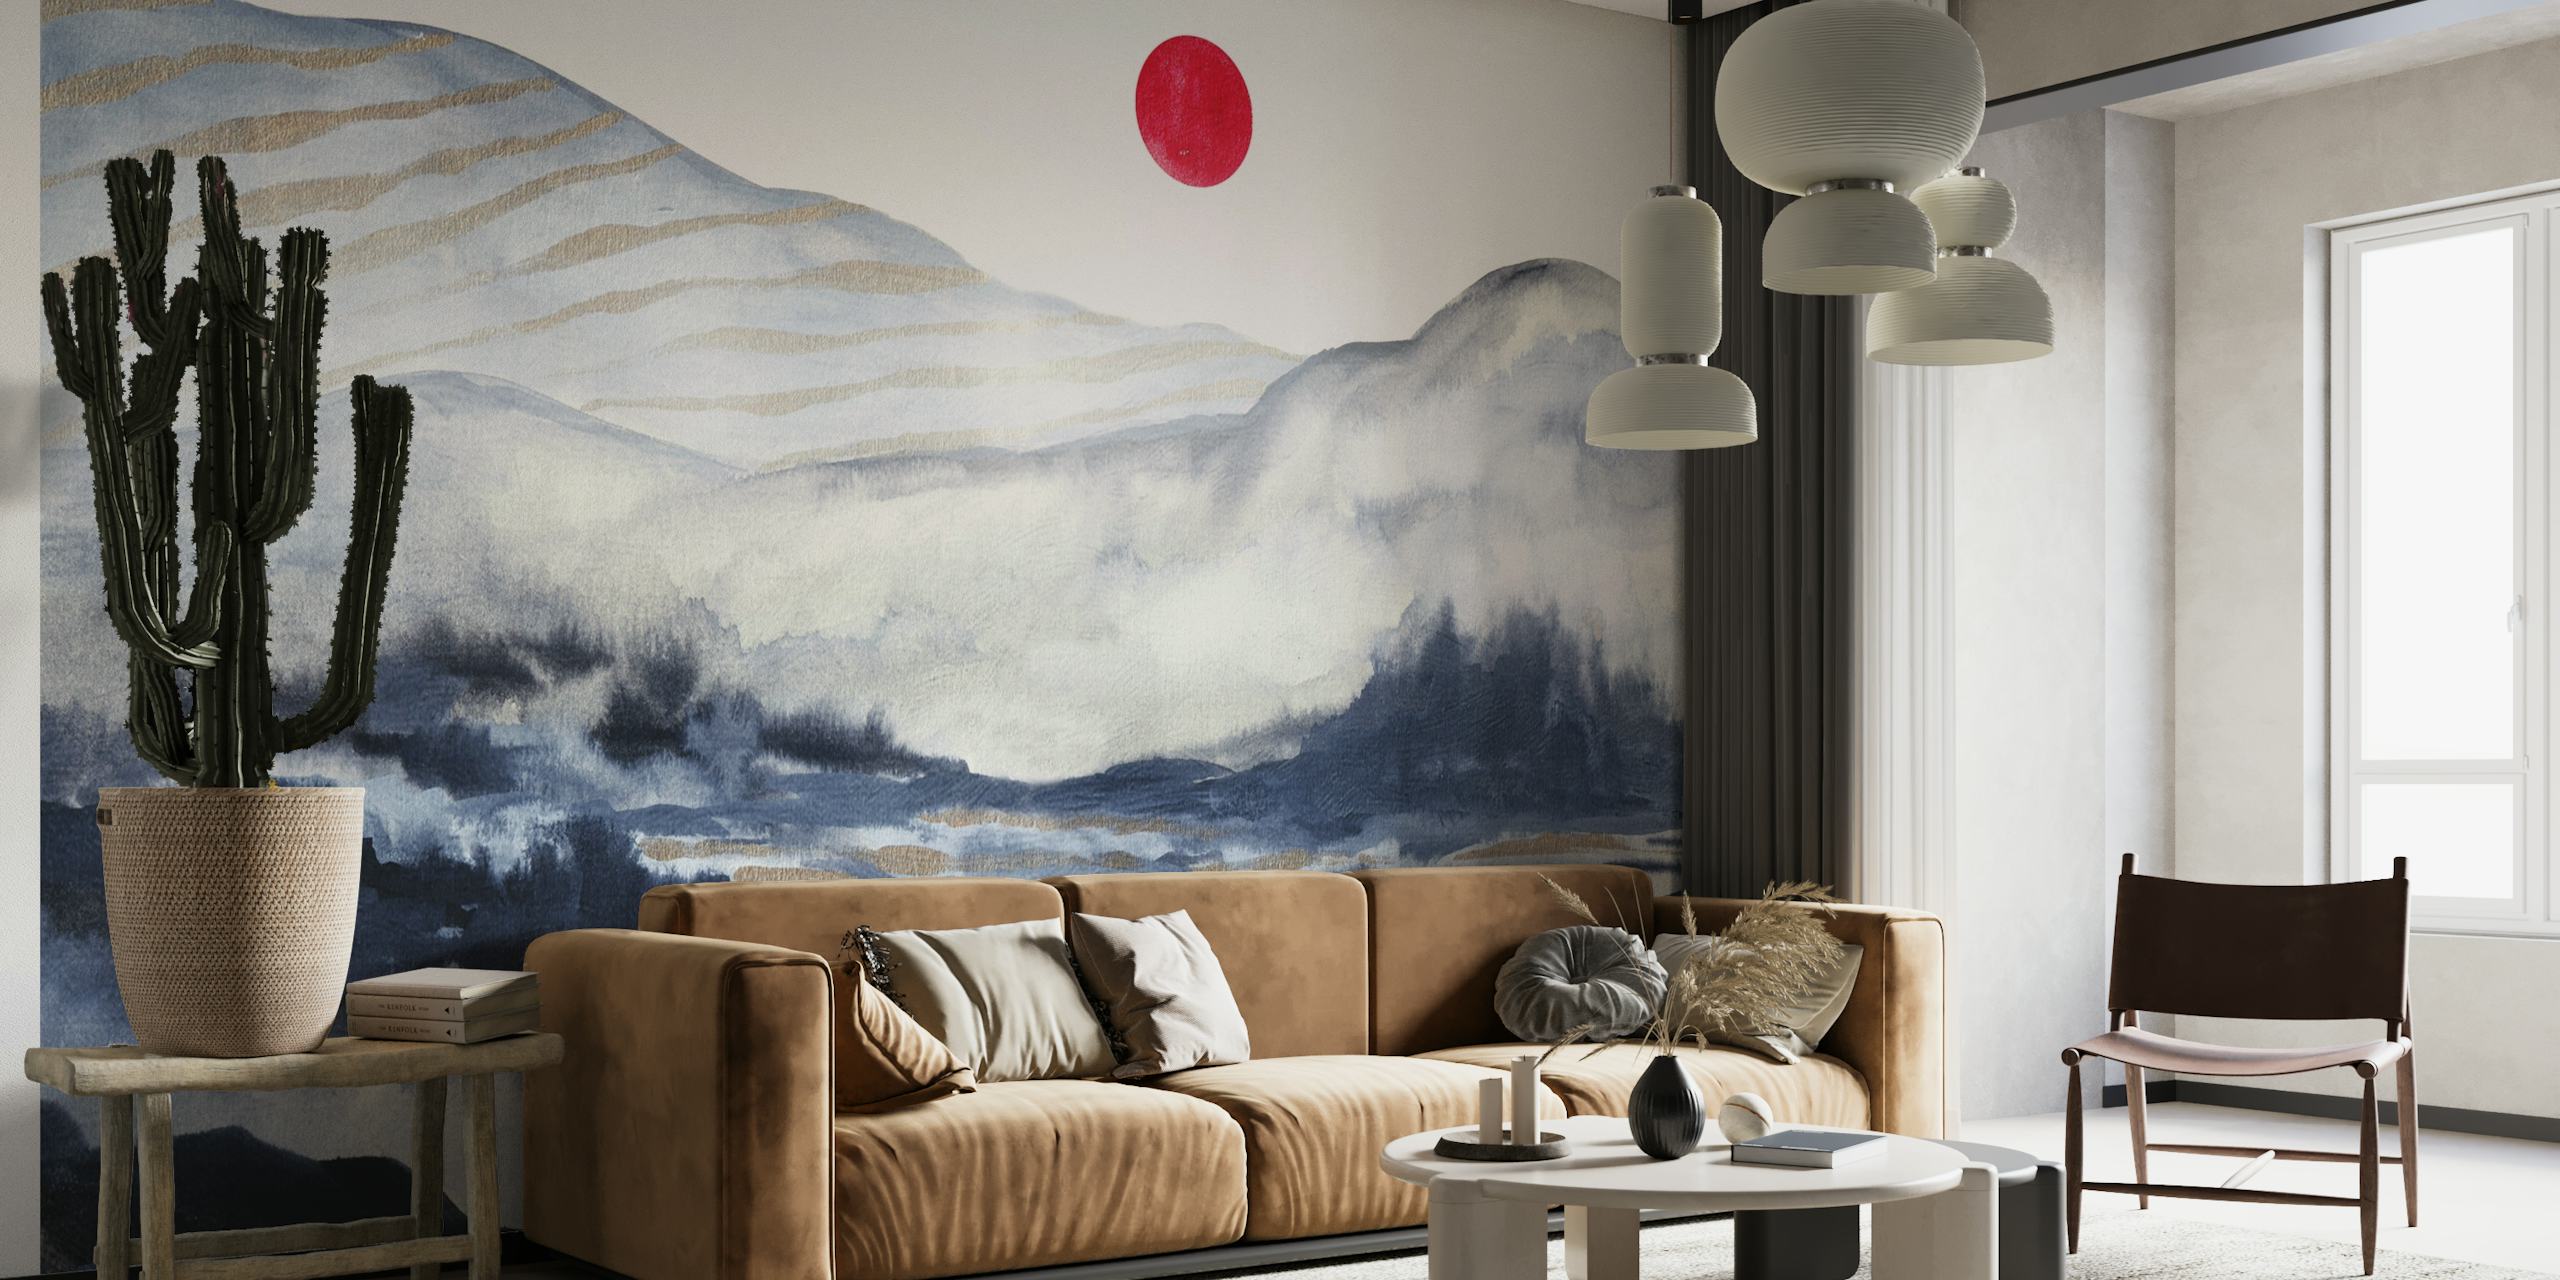 Abstract landscape wall mural with misty mountains and a red sun